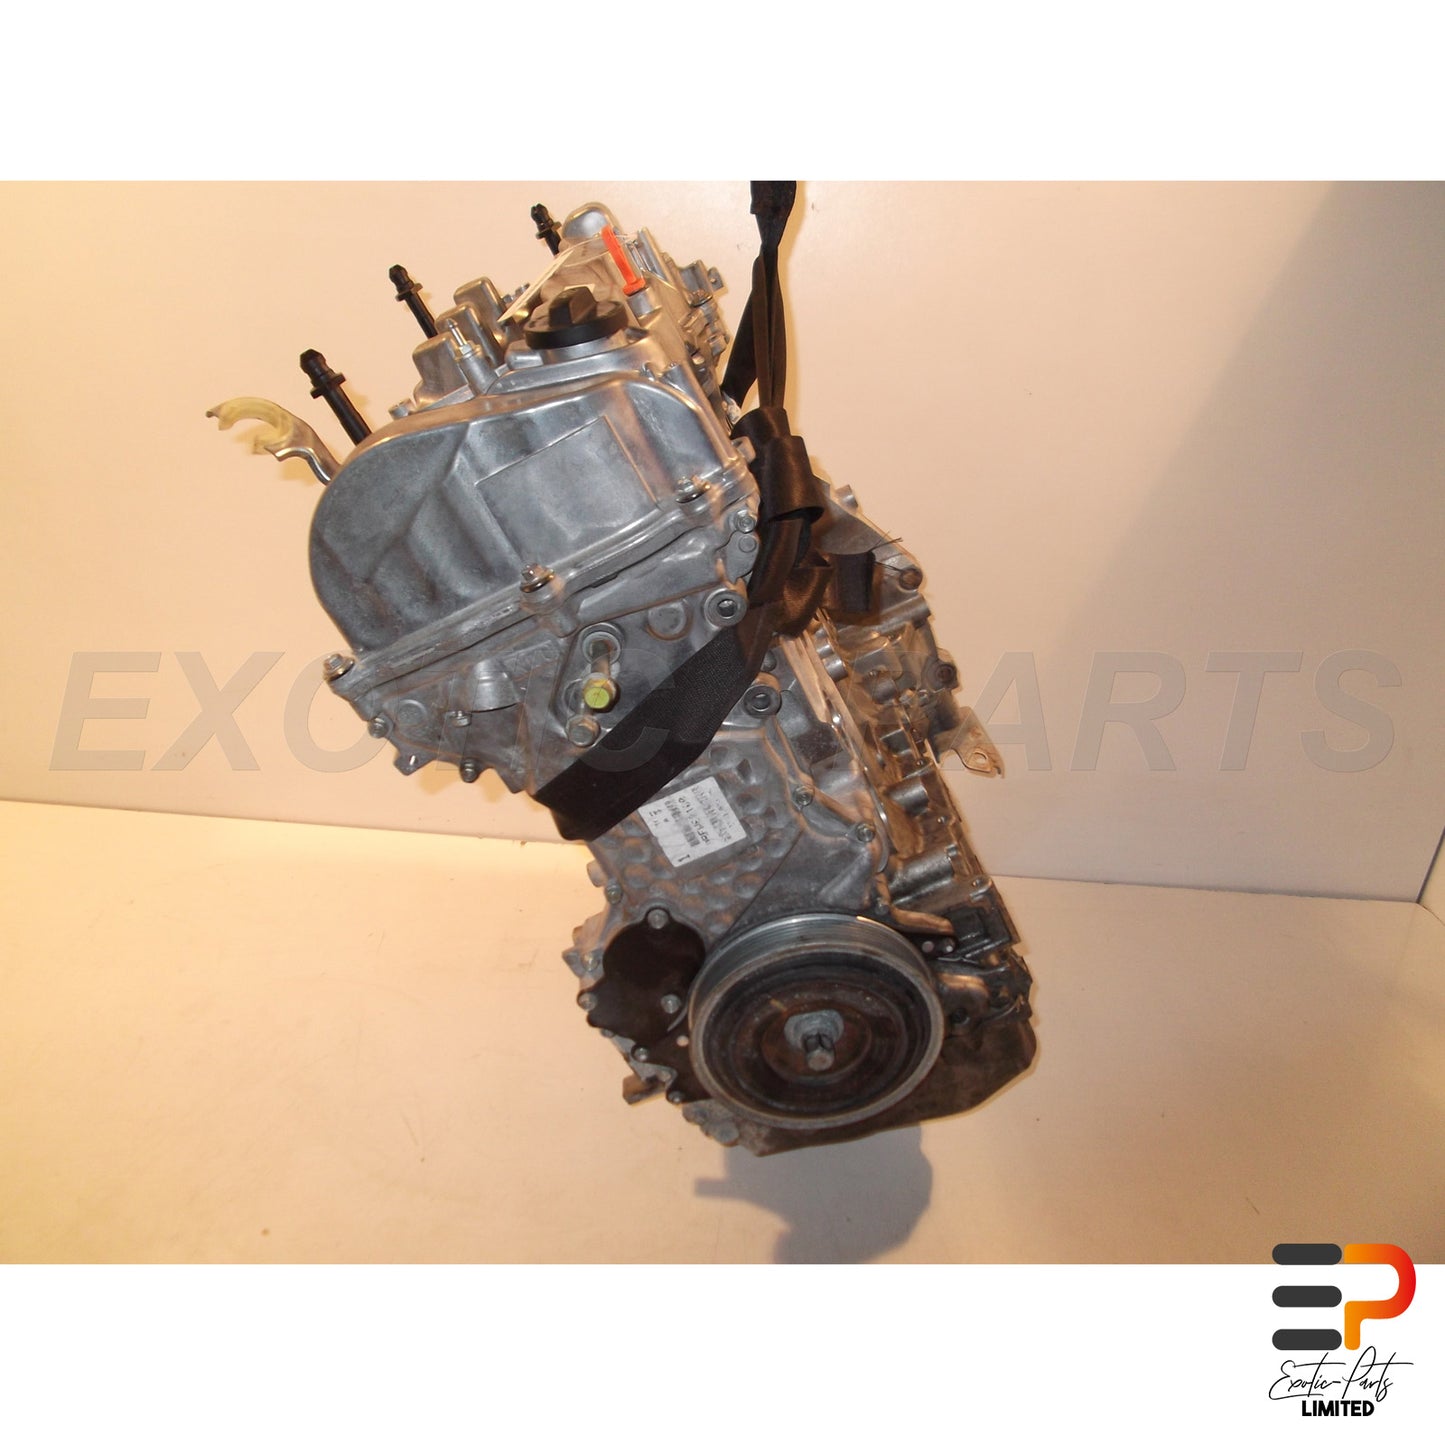 Honda CR-V 2.2 i-DTEC Engine | In mint condition (11395 KM) 11000-rl0-g00 picture 4